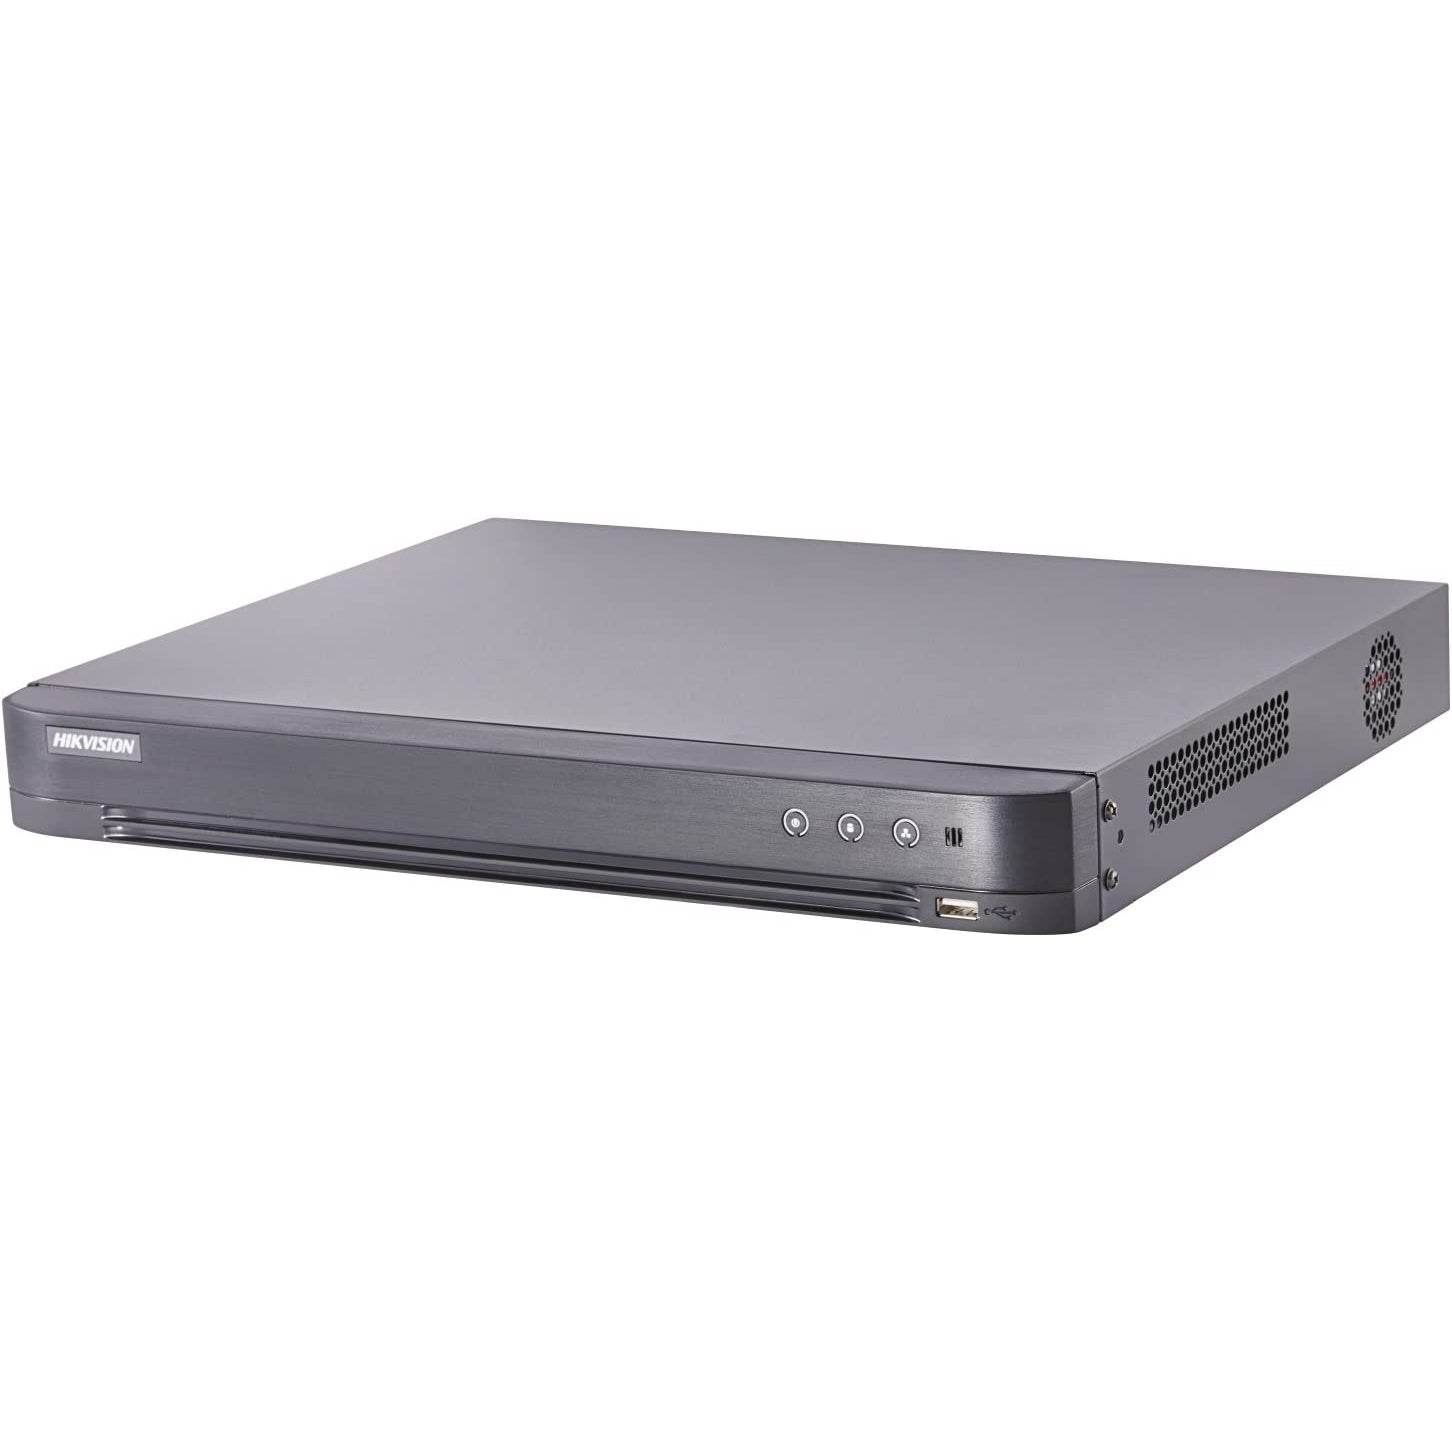 Hikvision DS-7200 Series Turbo HD DVR